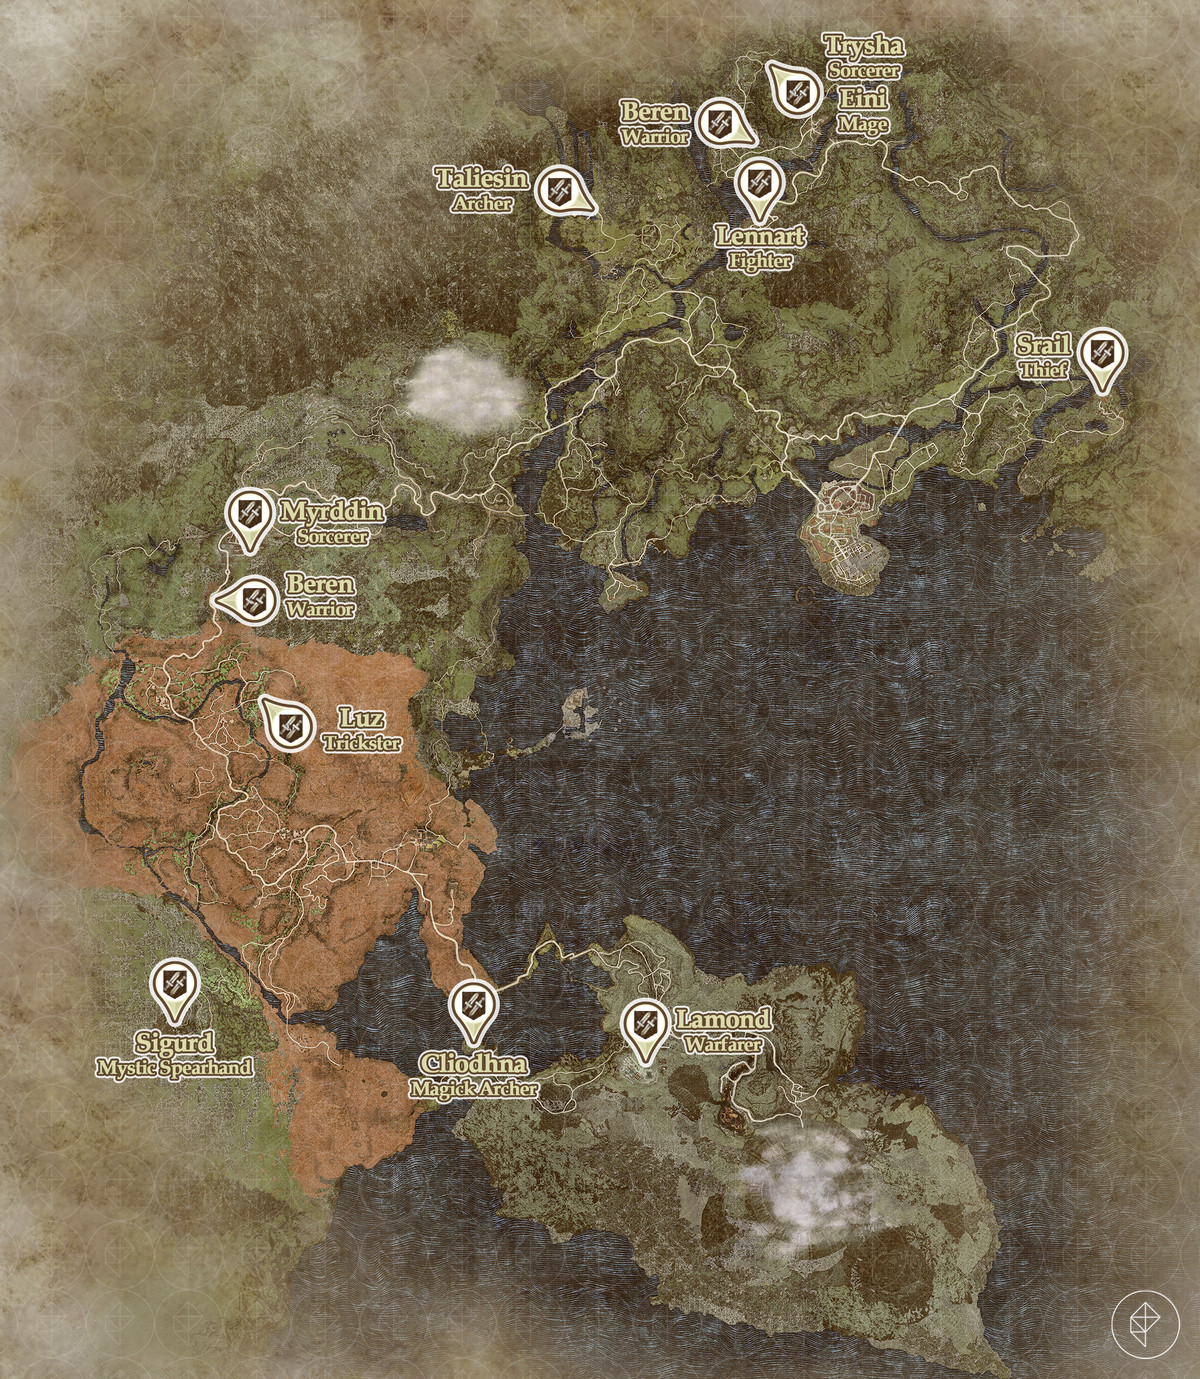 A map of Dragon’s Dogma 2, showing the locations for all 11 maisters